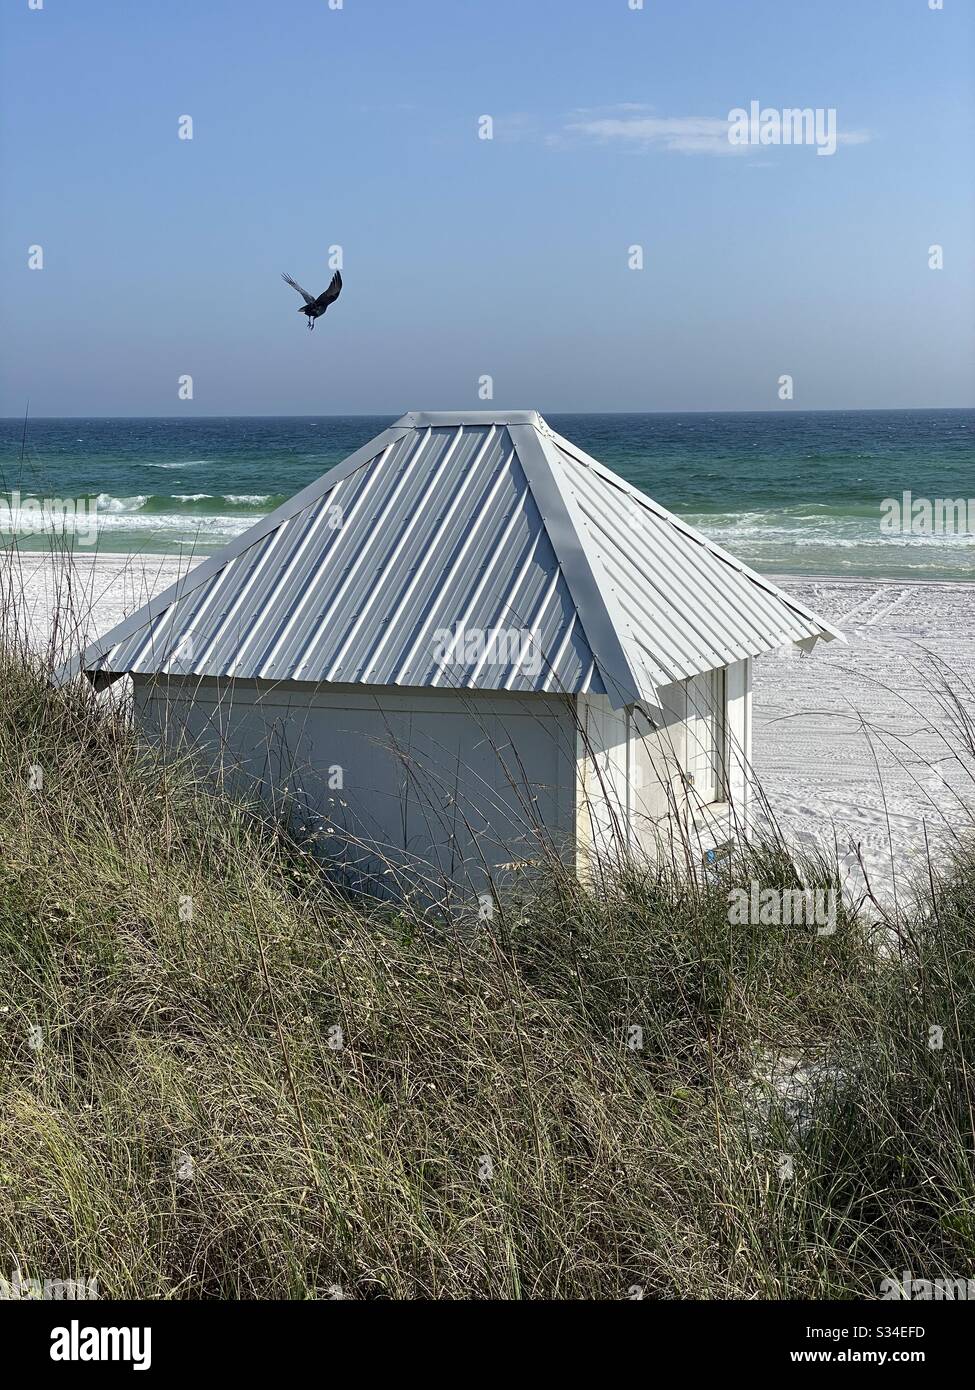 White beach hut on white sand beach with a black bird flying in the air Stock Photo